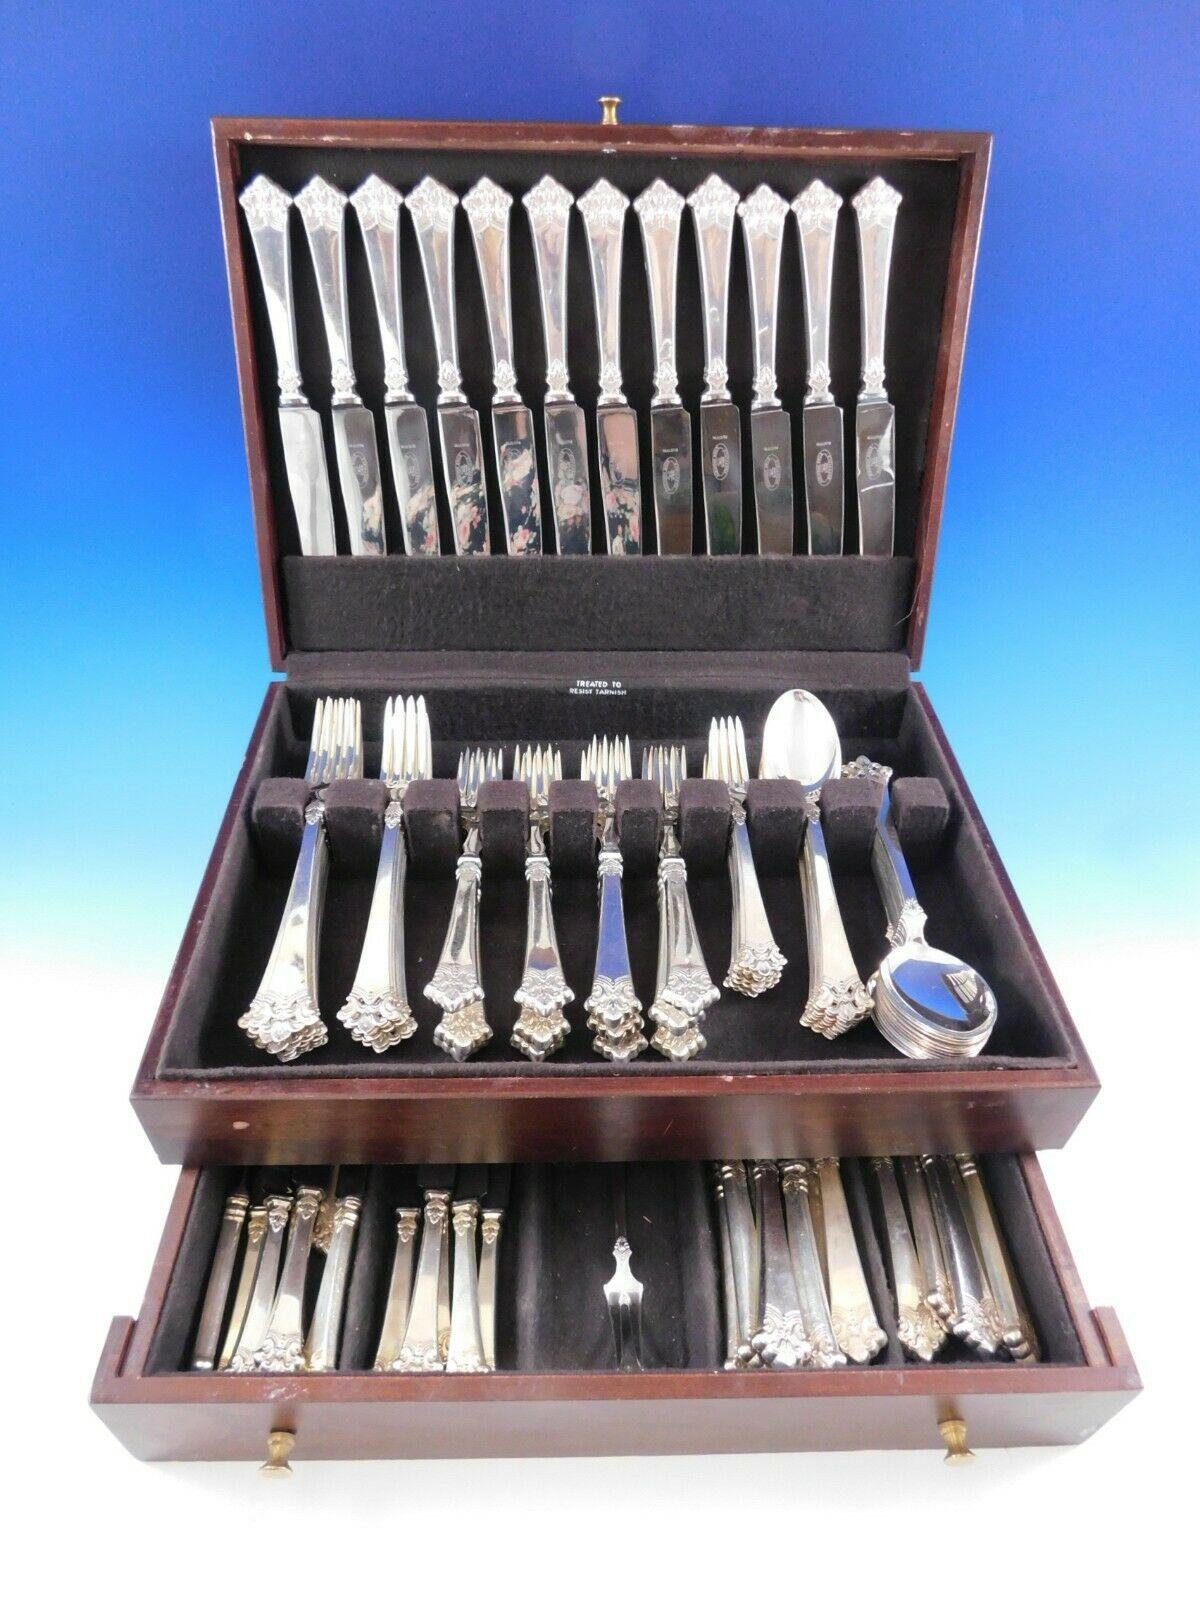 Scarce Anitra by Th. Olsens 830 silver Scandinavian Modern pierced handle flatware set - 109 pieces. This set includes:

12 Dinner knives w/stainless blades, 9 1/2